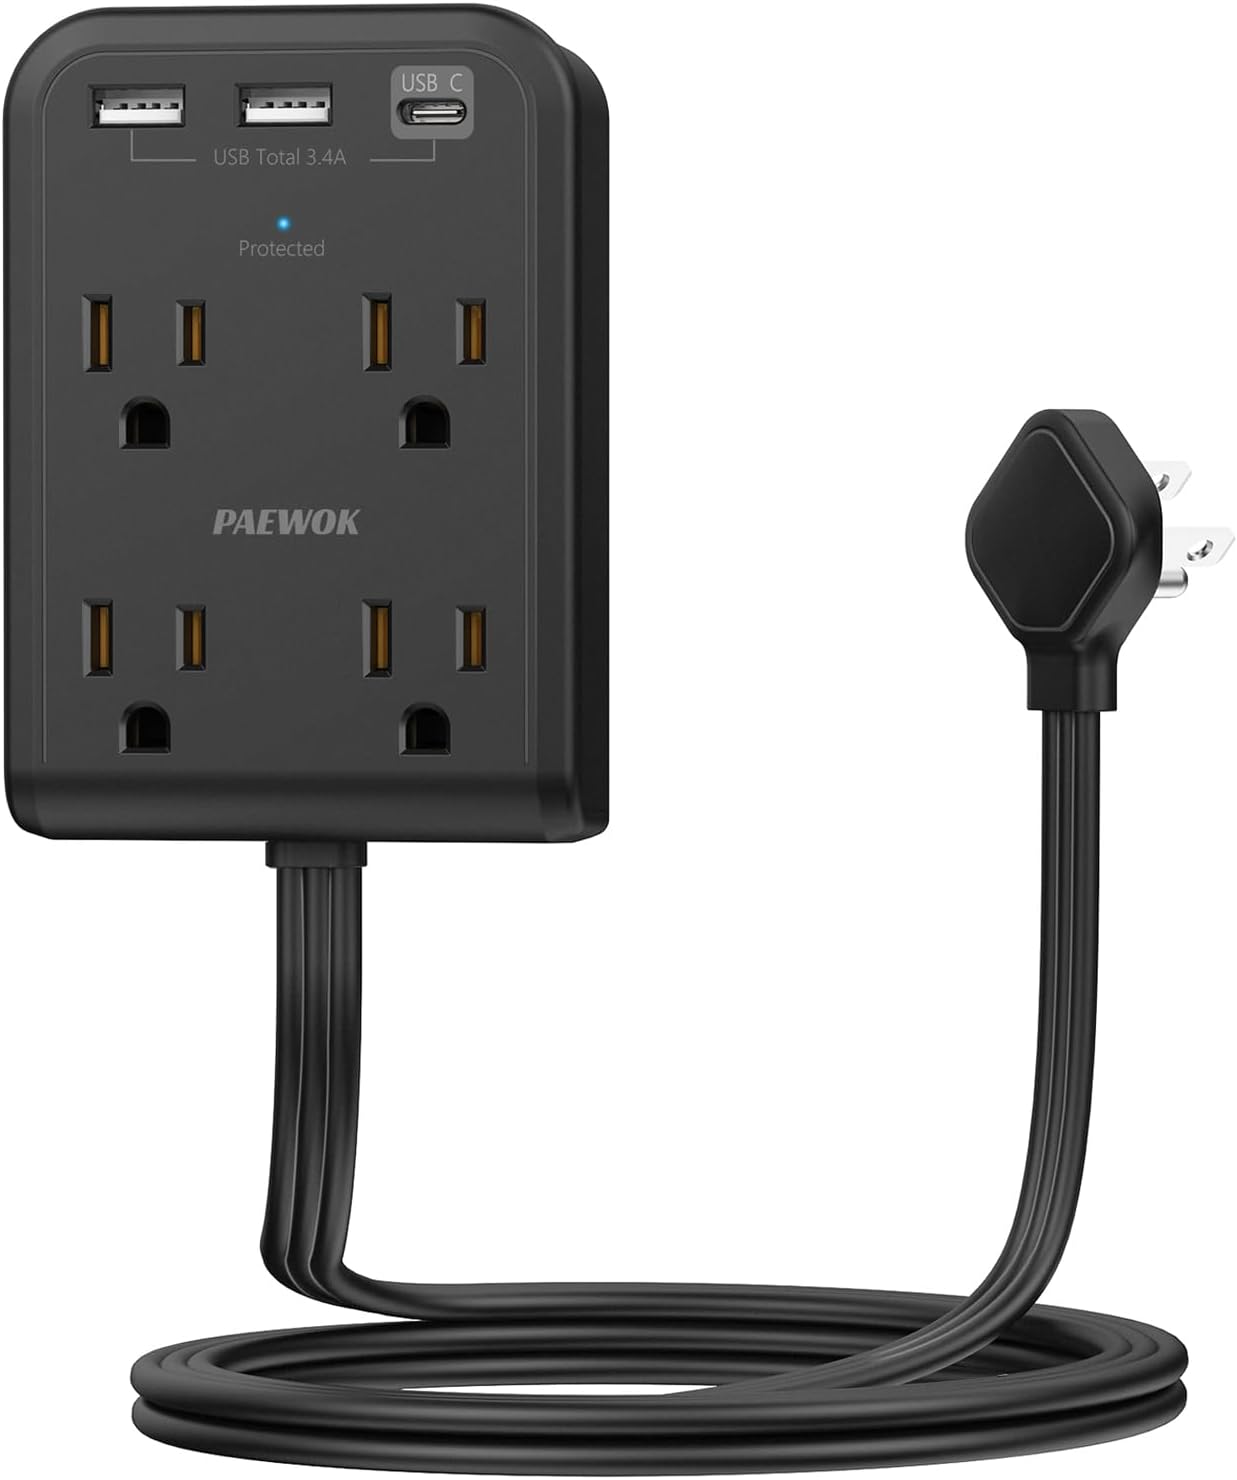 Flat Multi Plug Extender with 3 USB Wall Charger(1 Type C), 4 Outlet Wall Adapter, 4 ft Thin Extension Cord, Flat Plug Surge Protector Power Strip for Home, Office. Black